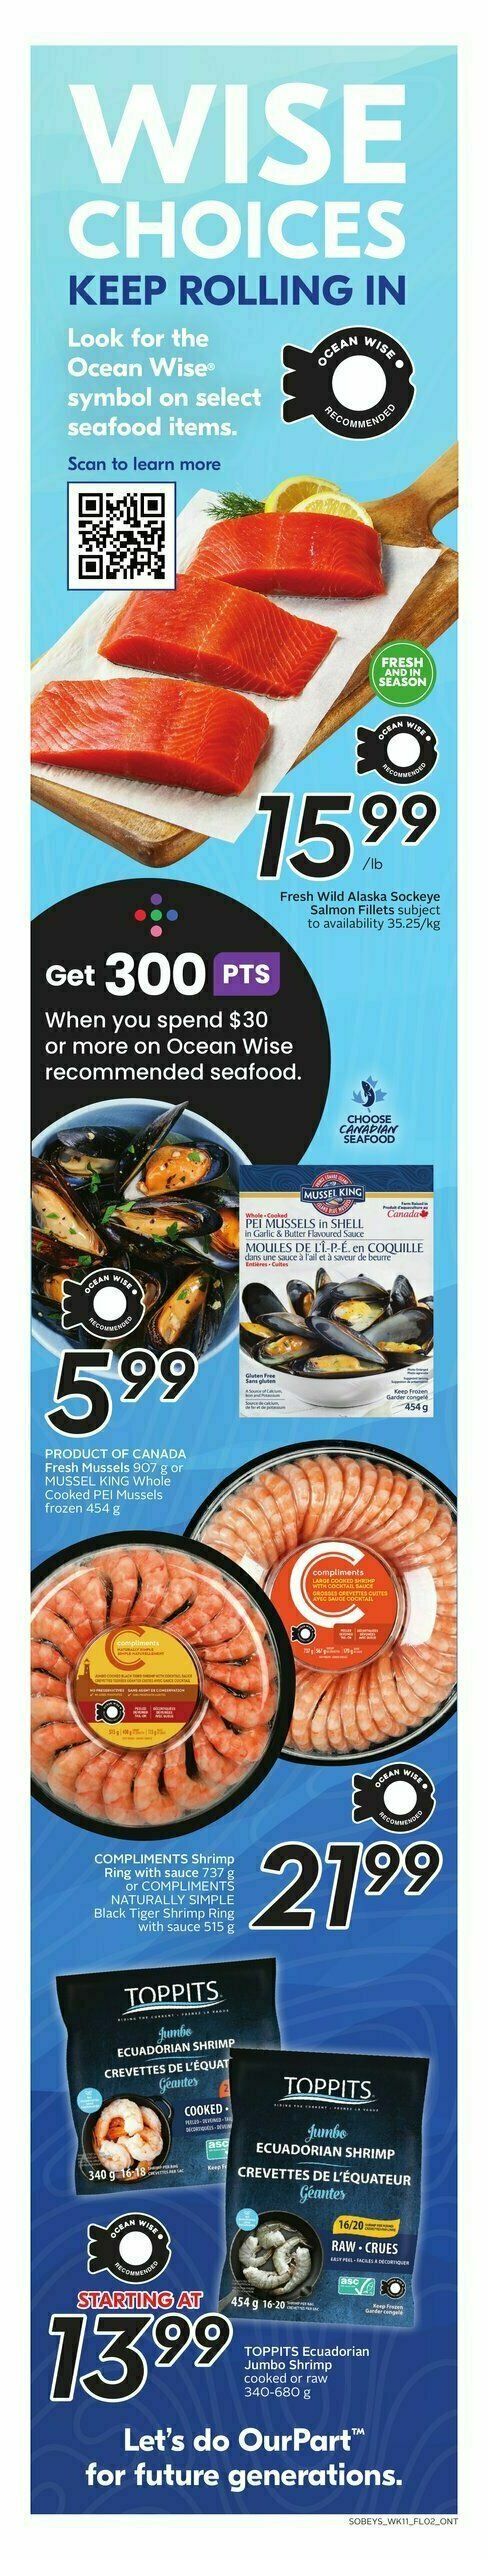 Sobeys Flyer from July 13